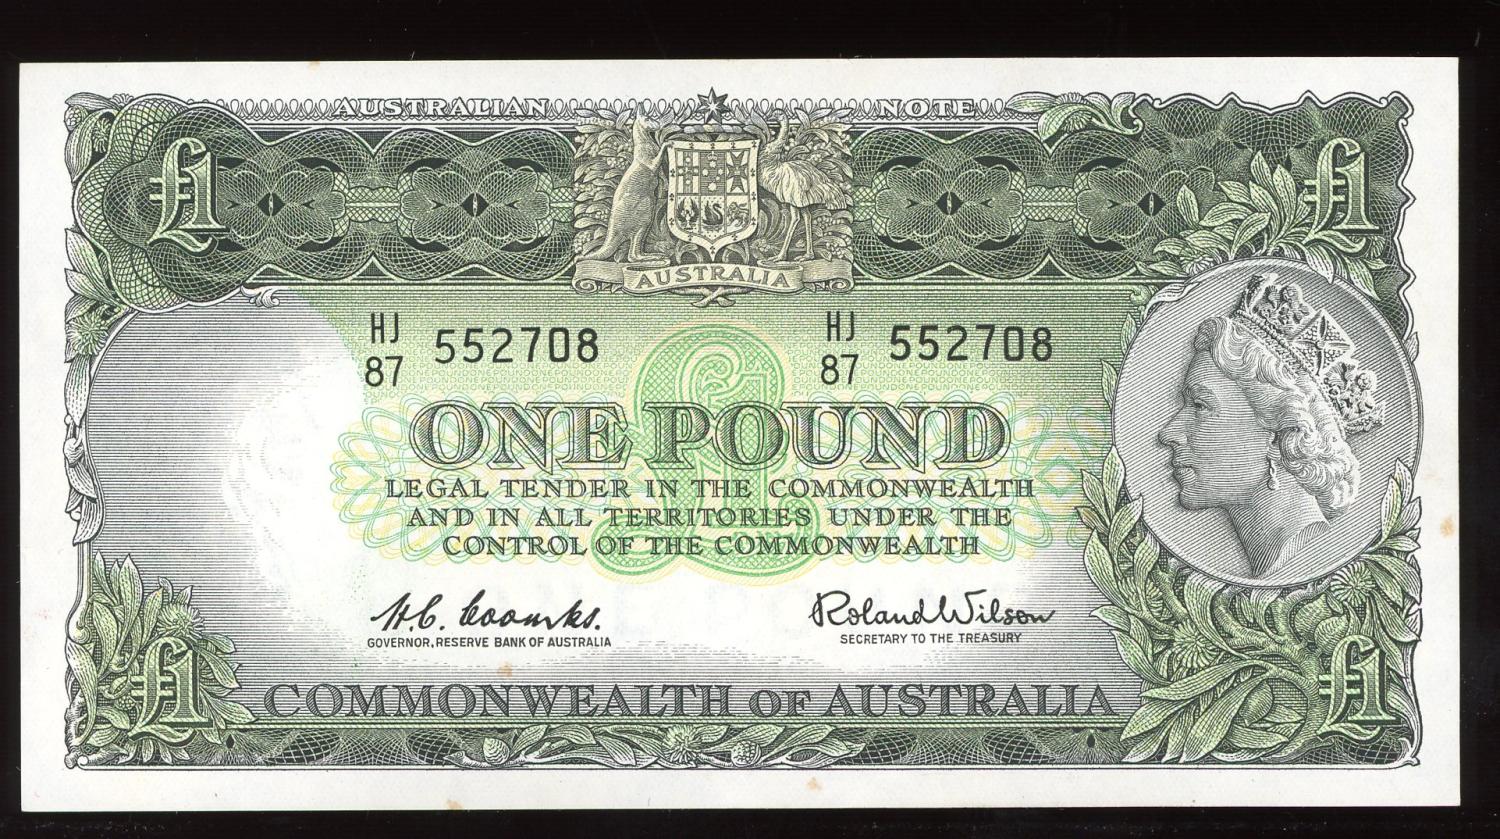 Thumbnail for 1961 One Pound Note Coombs - Wilson HJ87 552708 EF